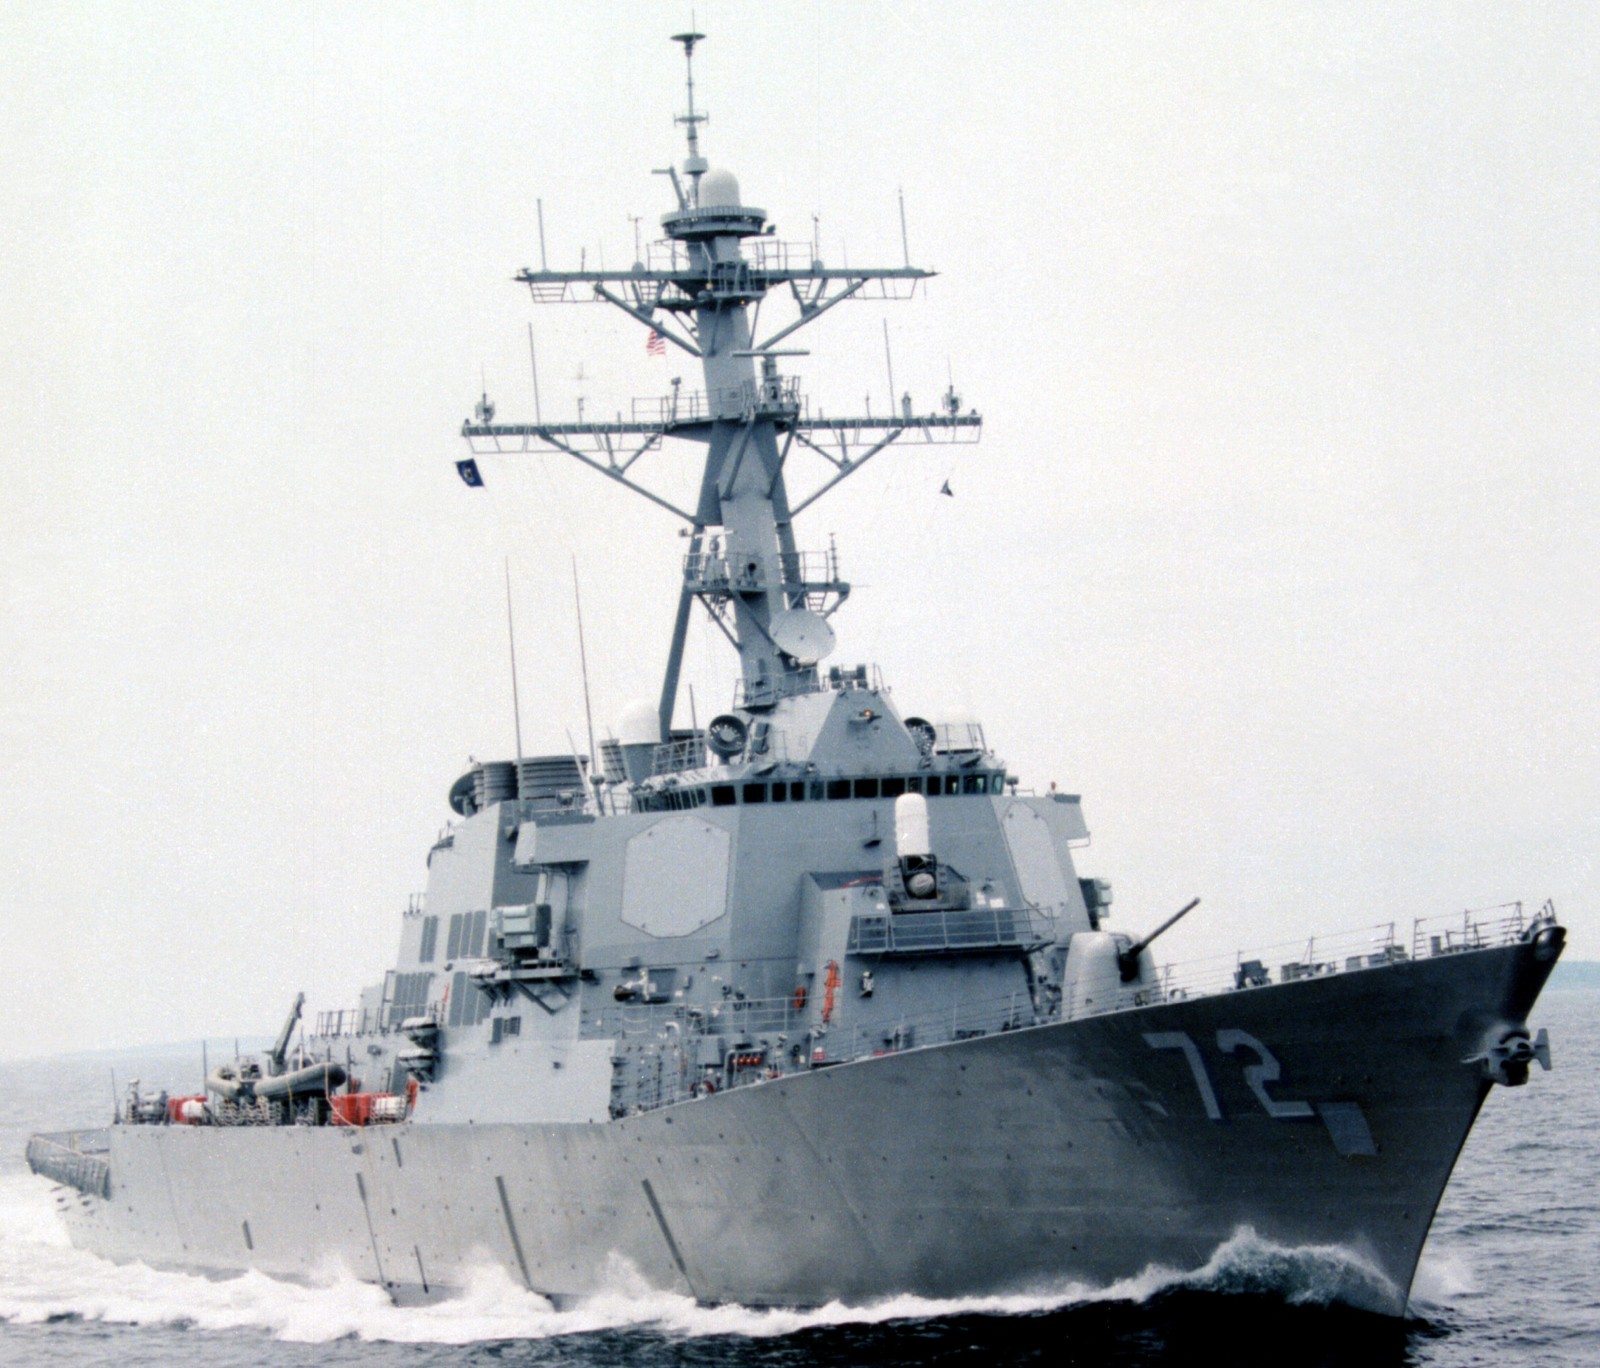 ddg-72 uss mahan guided missile destroyer arleigh burke class aegis bmd 44 trials